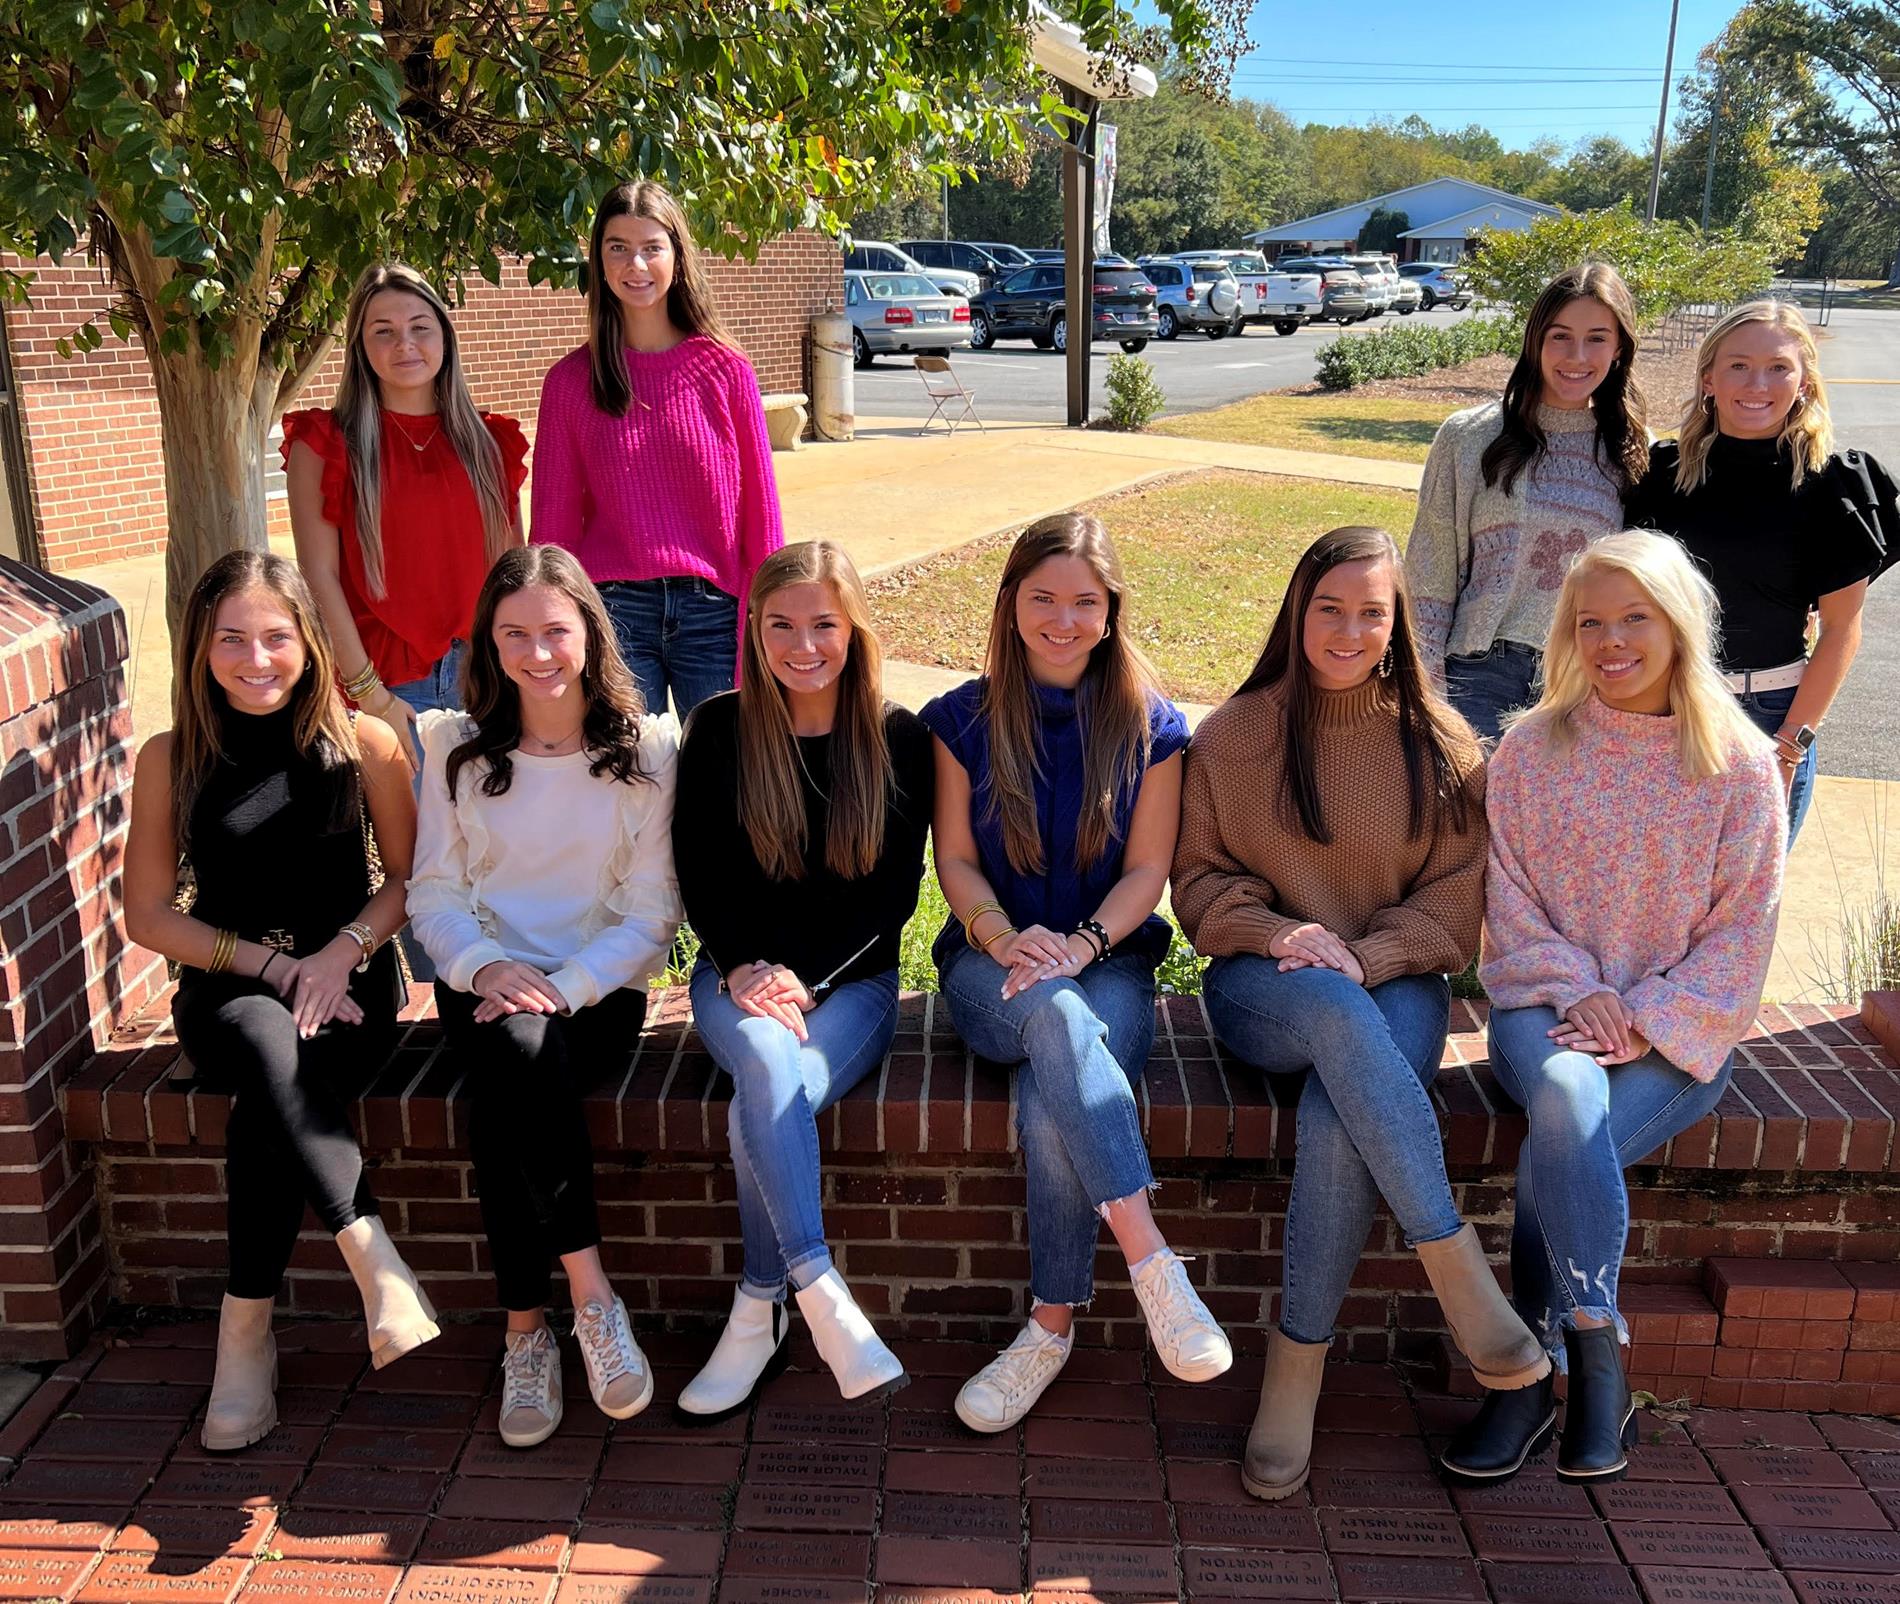 Pictured are the young ladies elected to the 2022 Homecoming Court.